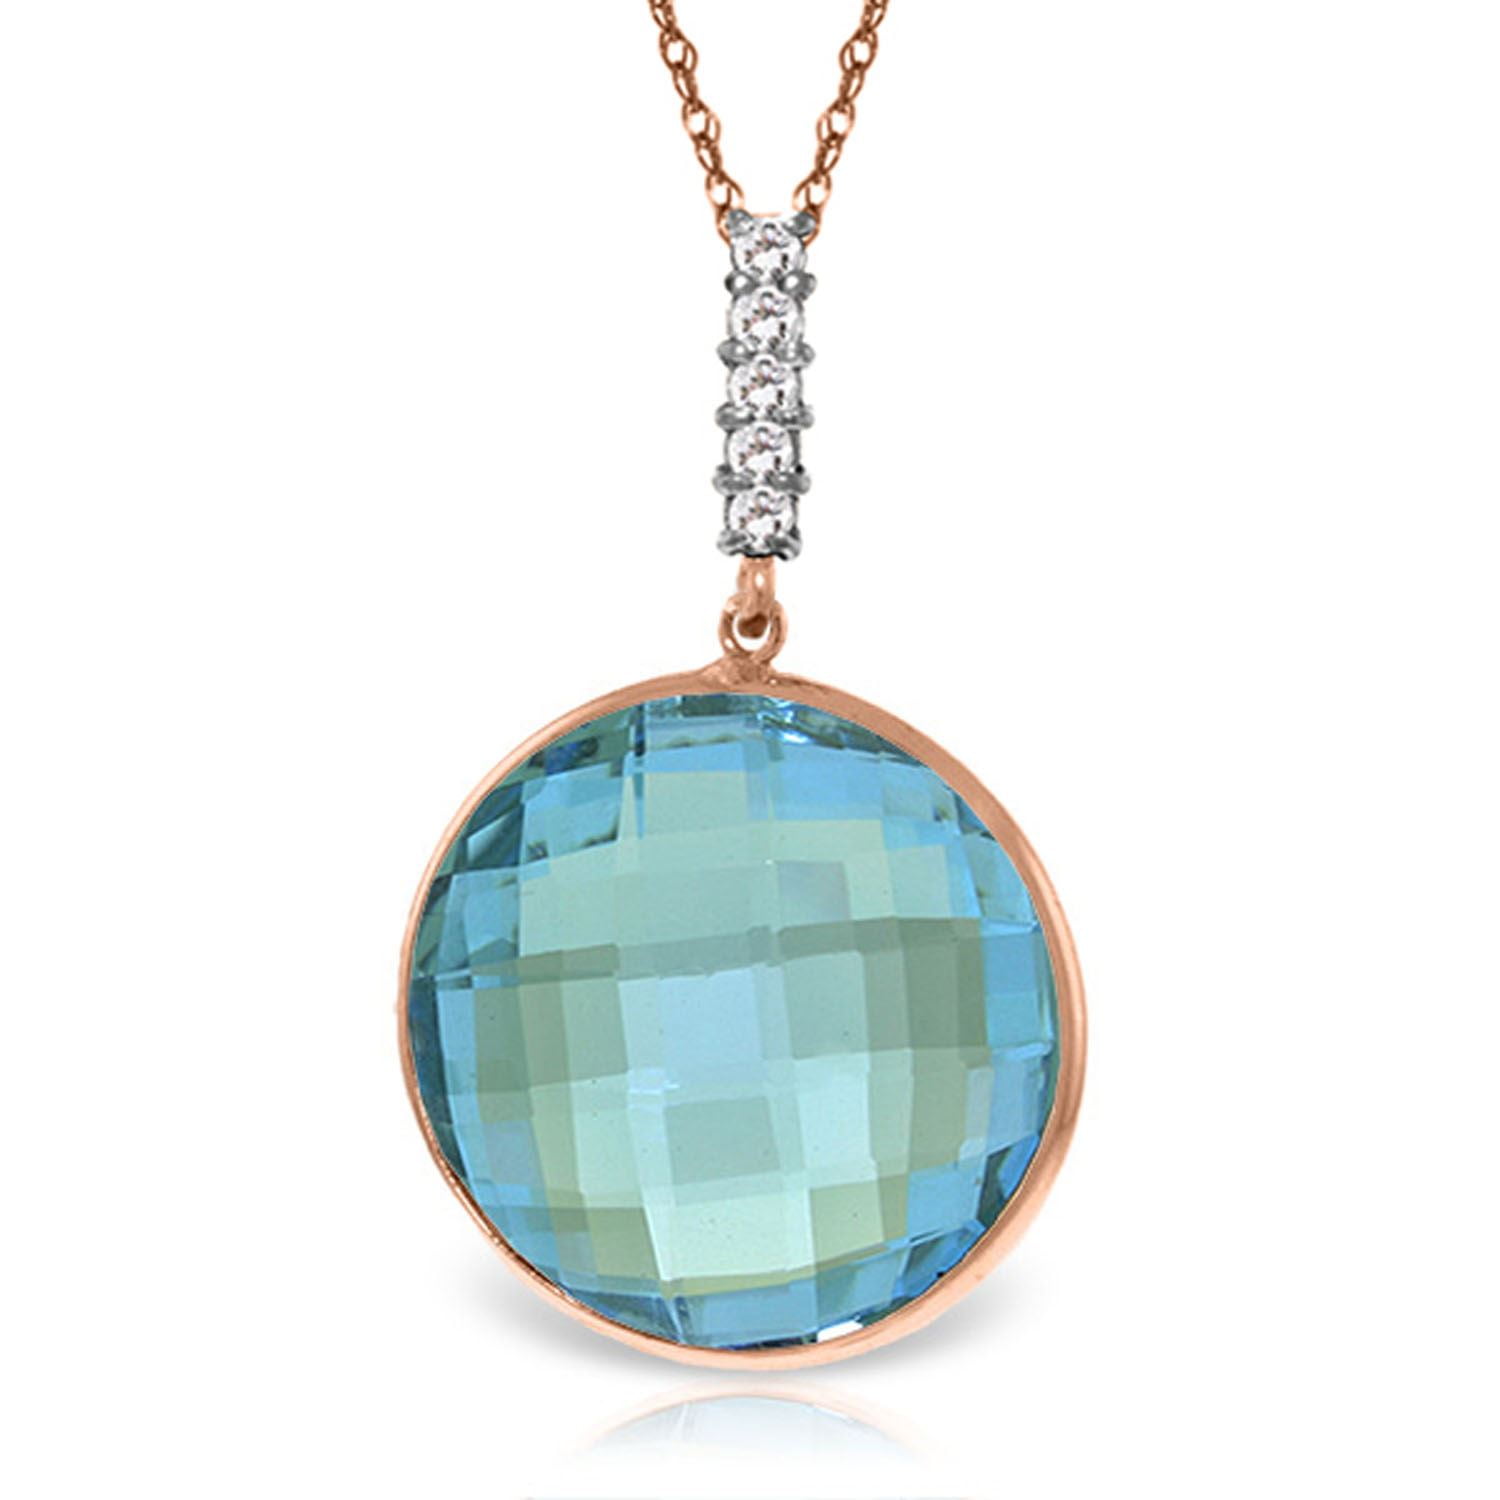 ALARRI 14K Solid Rose Gold Necklace w/ Checkerboard Cut Blue Topaz with 20 Inch Chain Length